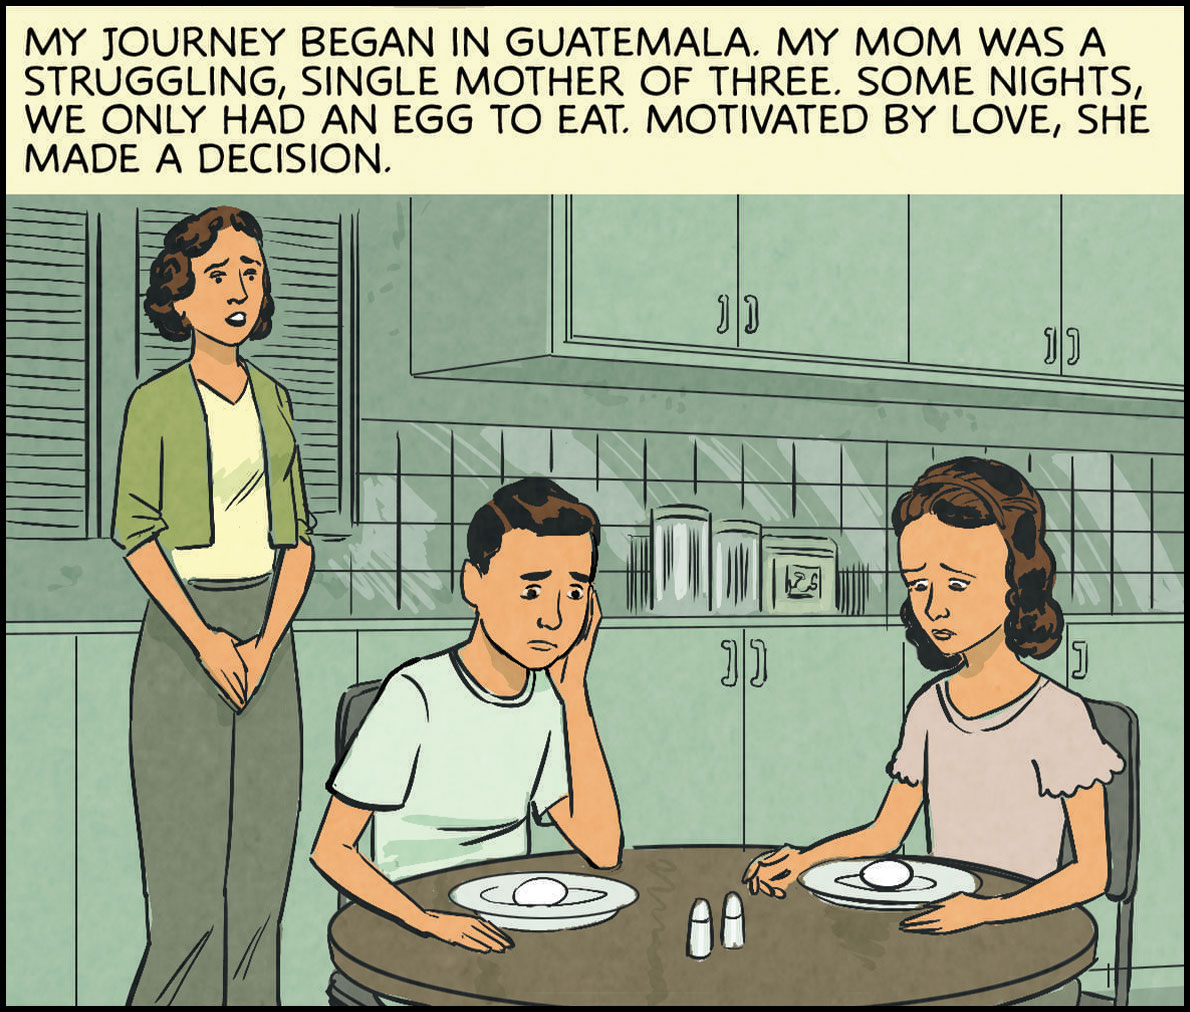 My journey began in Guatemala. My mom was a struggling, single mother of 3. Some nights, we only had an egg to eat. Motivated by love, she made a decision.